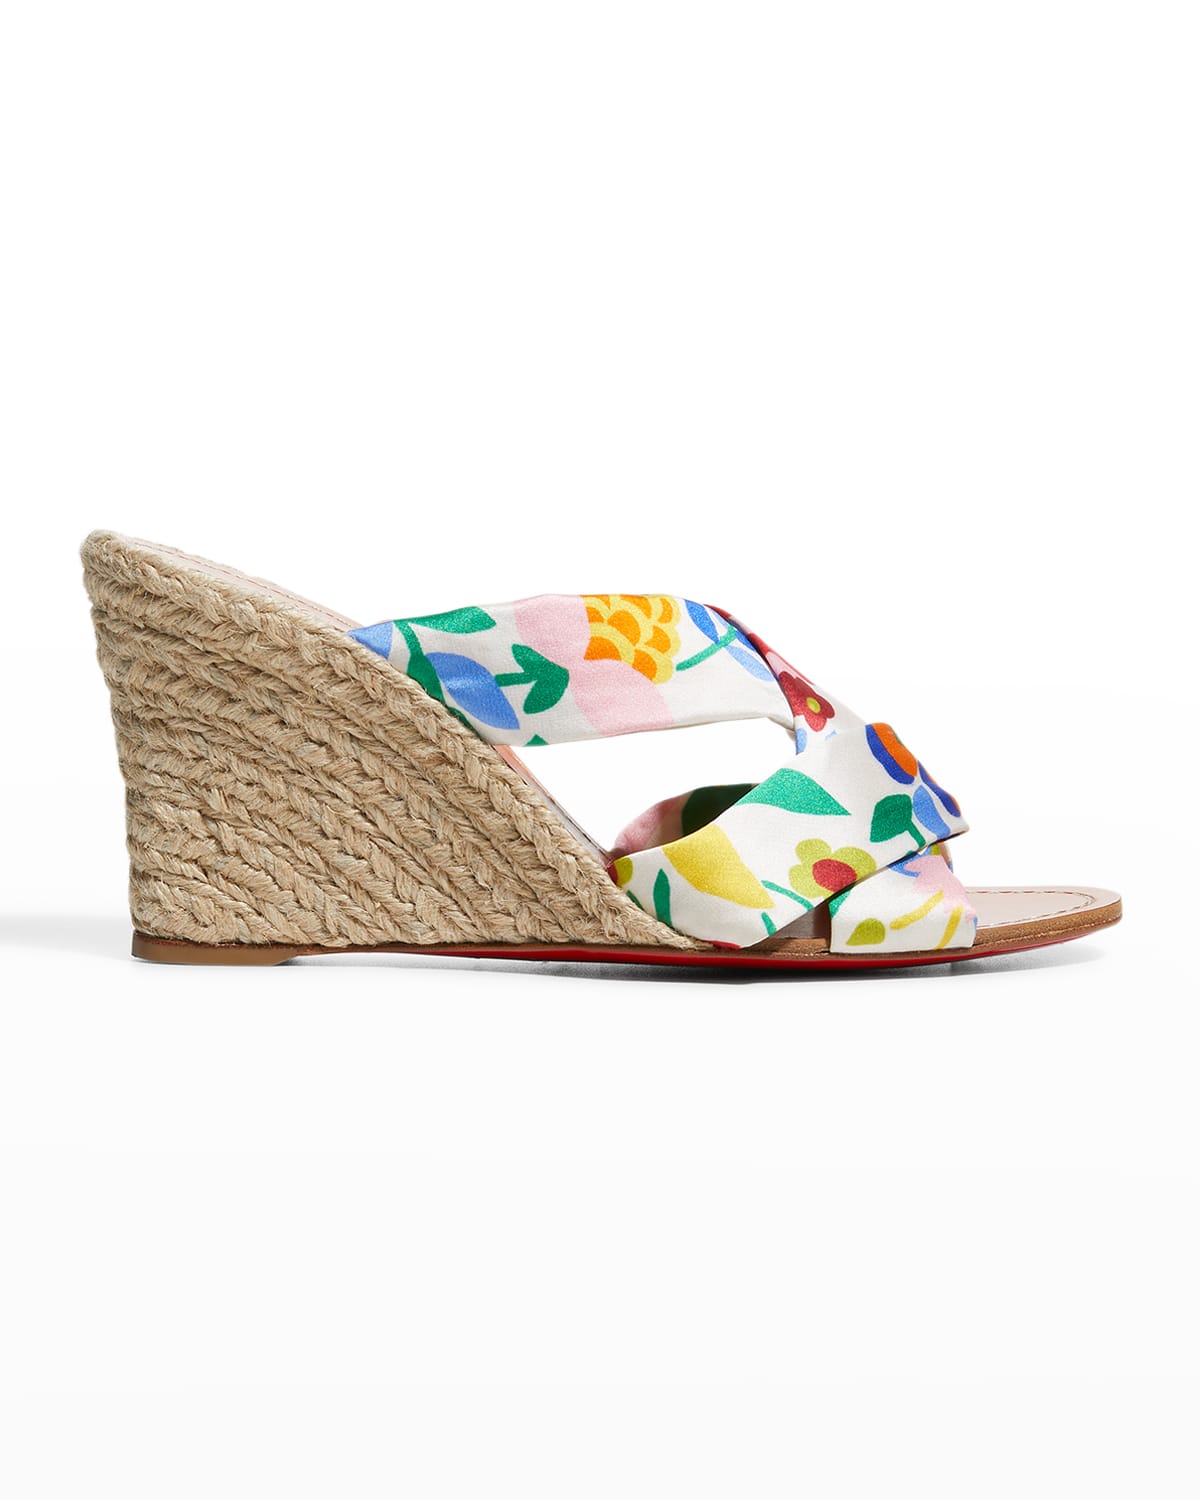 Christian Louboutin Floral Satin Red Sole Wedge Espadrilles